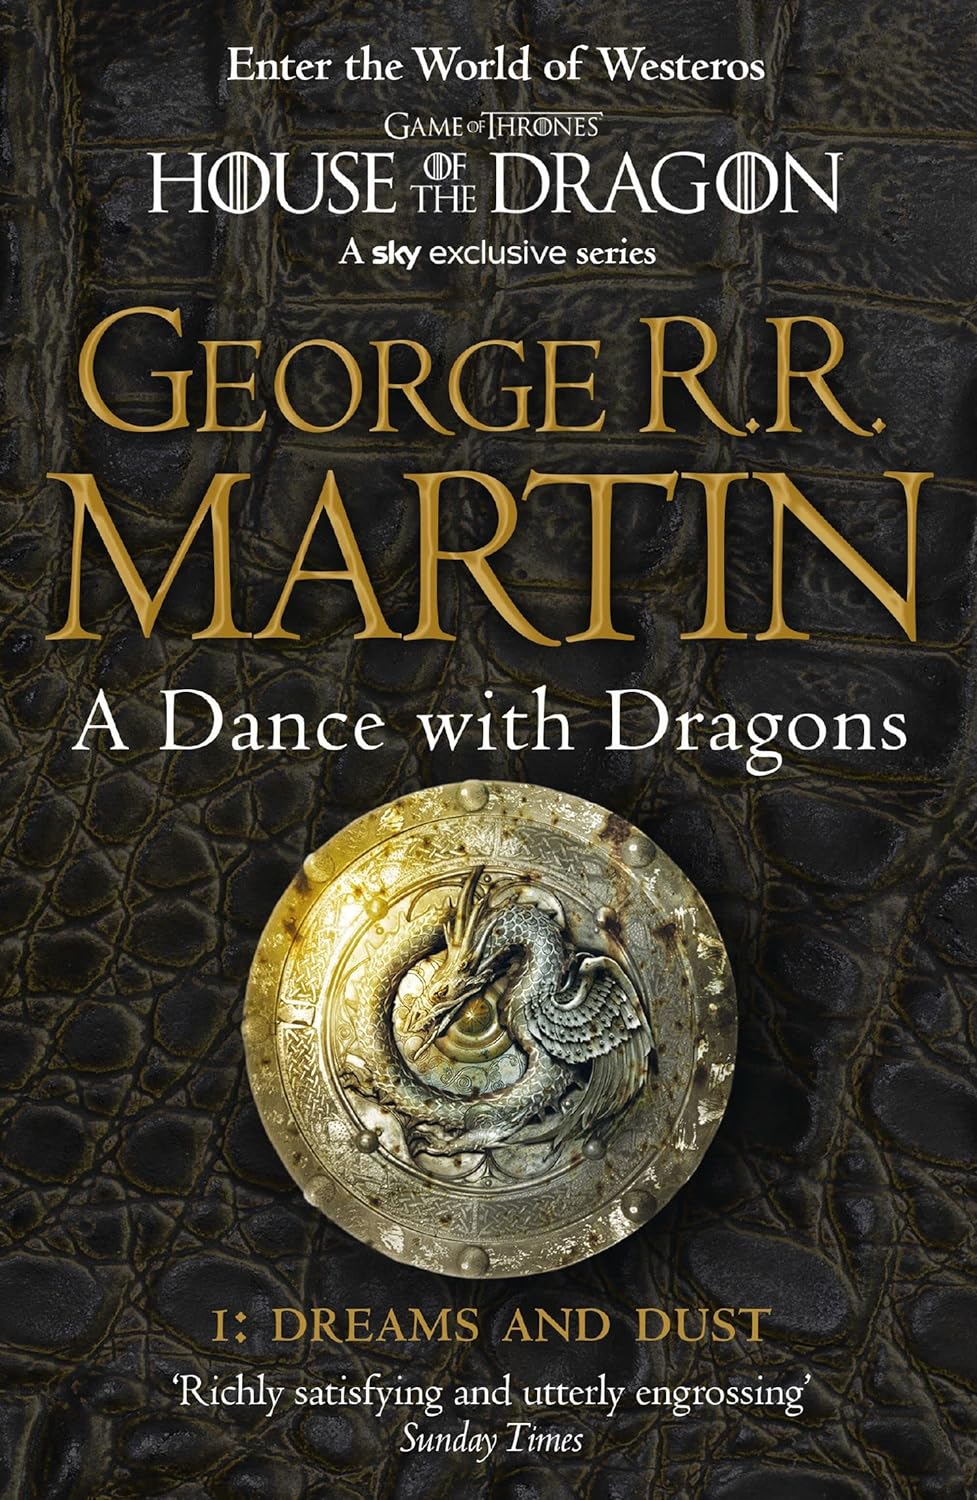 A Dance With Dragons: Part 1 - Dreams and Dust Book 5